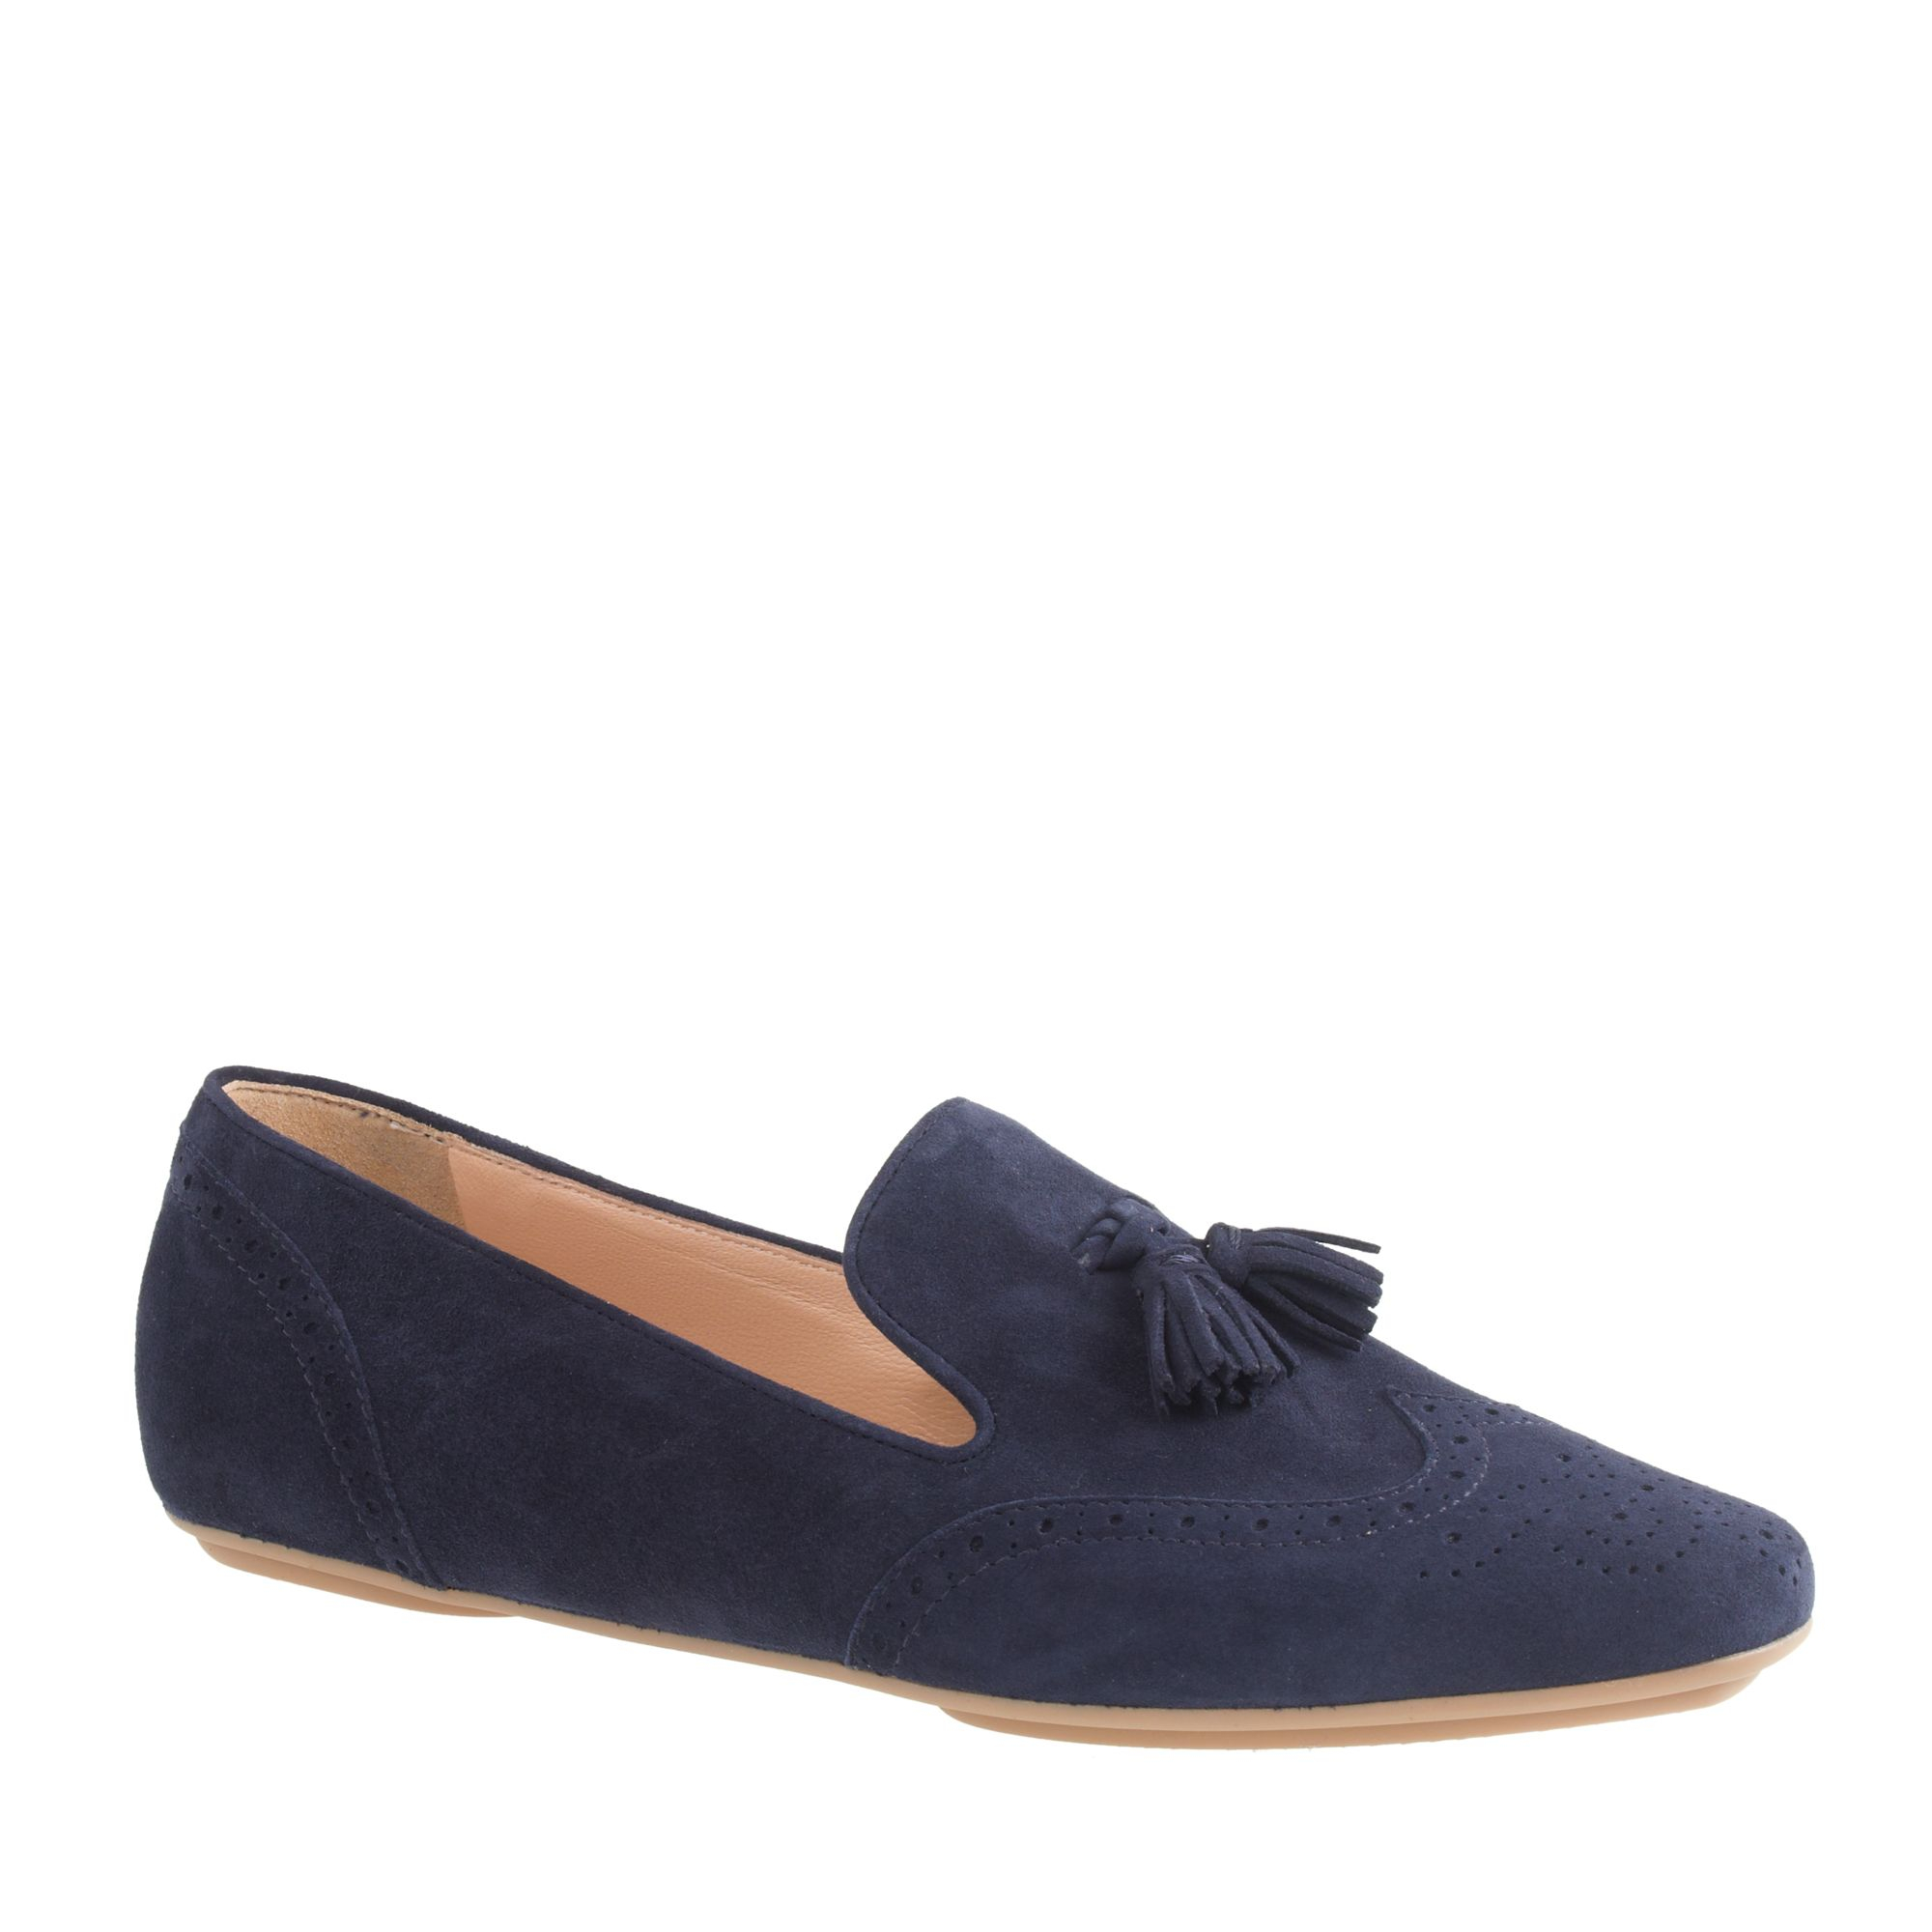 J.crew Georgie Suede Tassel Loafers in Blue (authentic navy) | Lyst